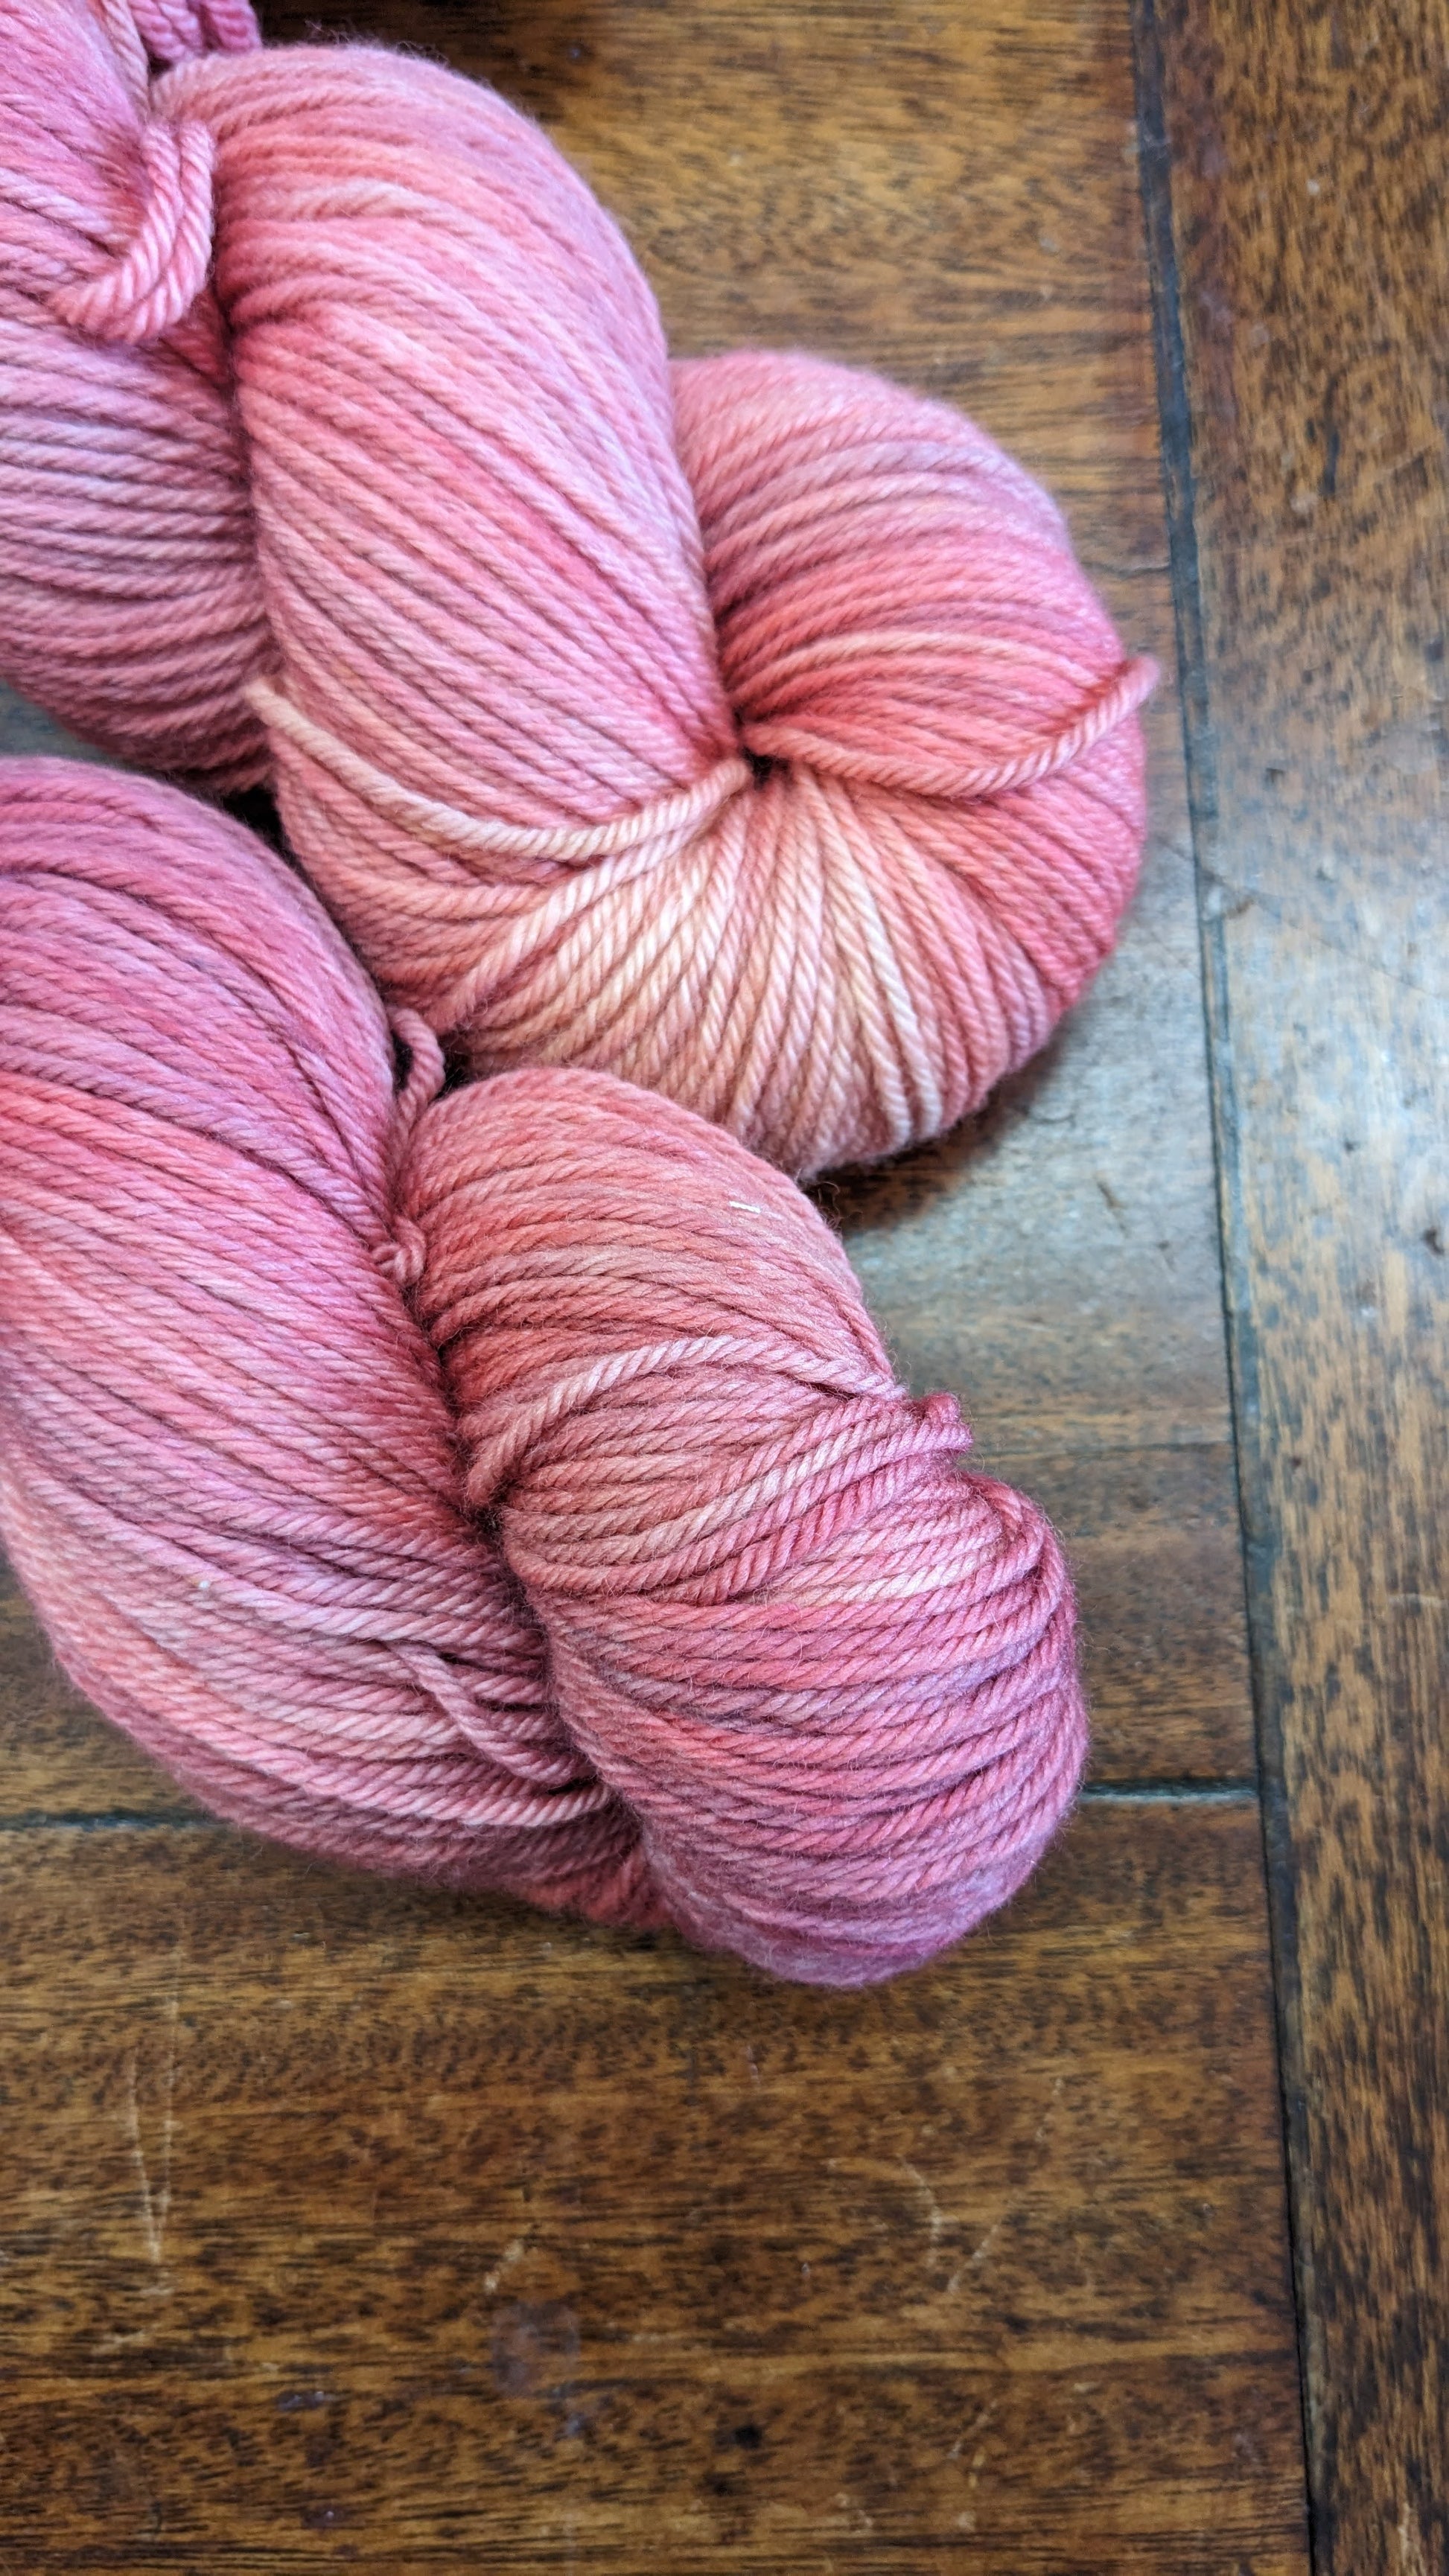 YARN, And the Devils